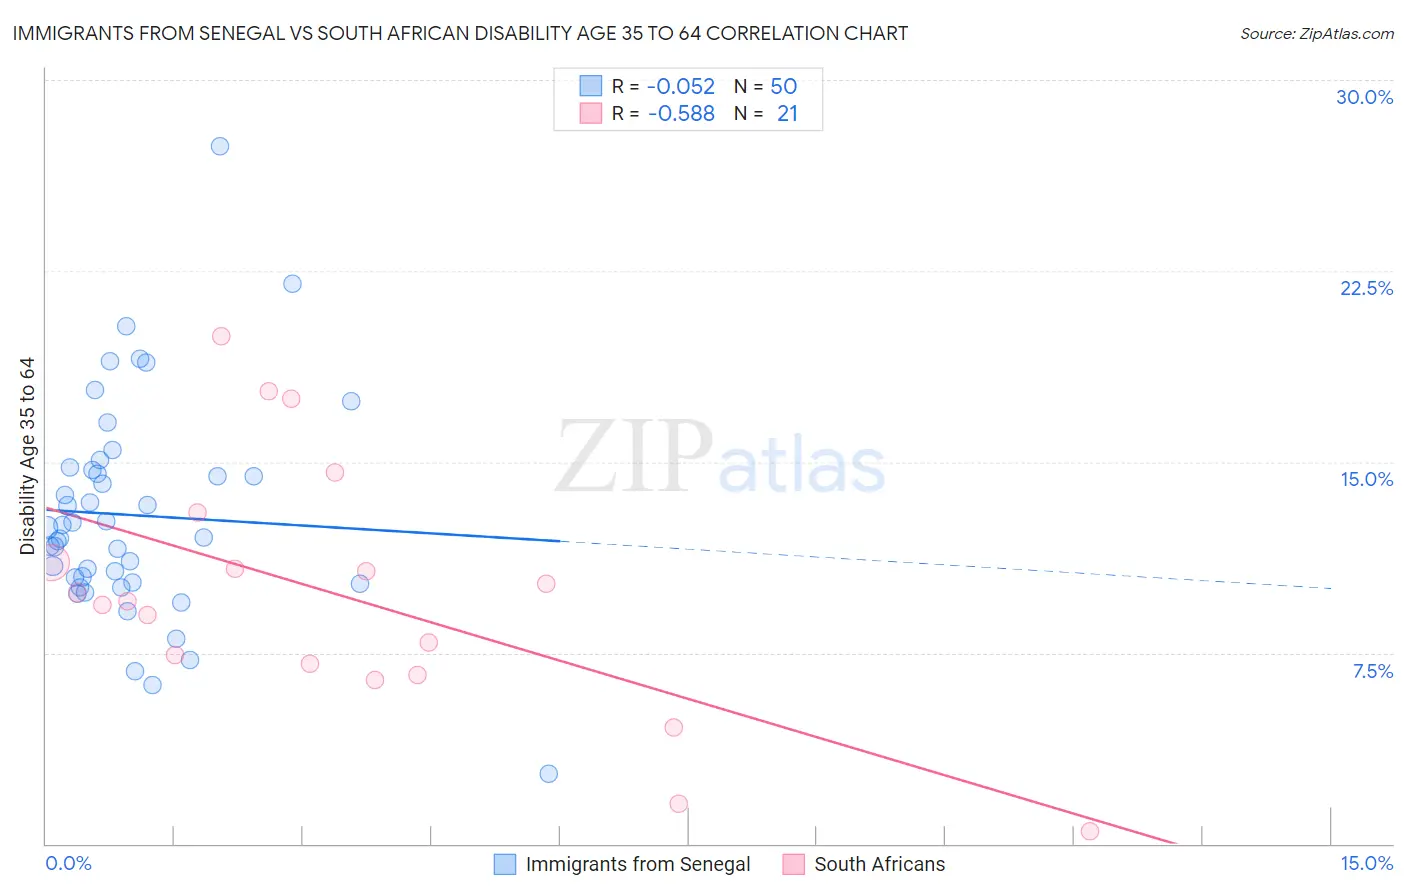 Immigrants from Senegal vs South African Disability Age 35 to 64